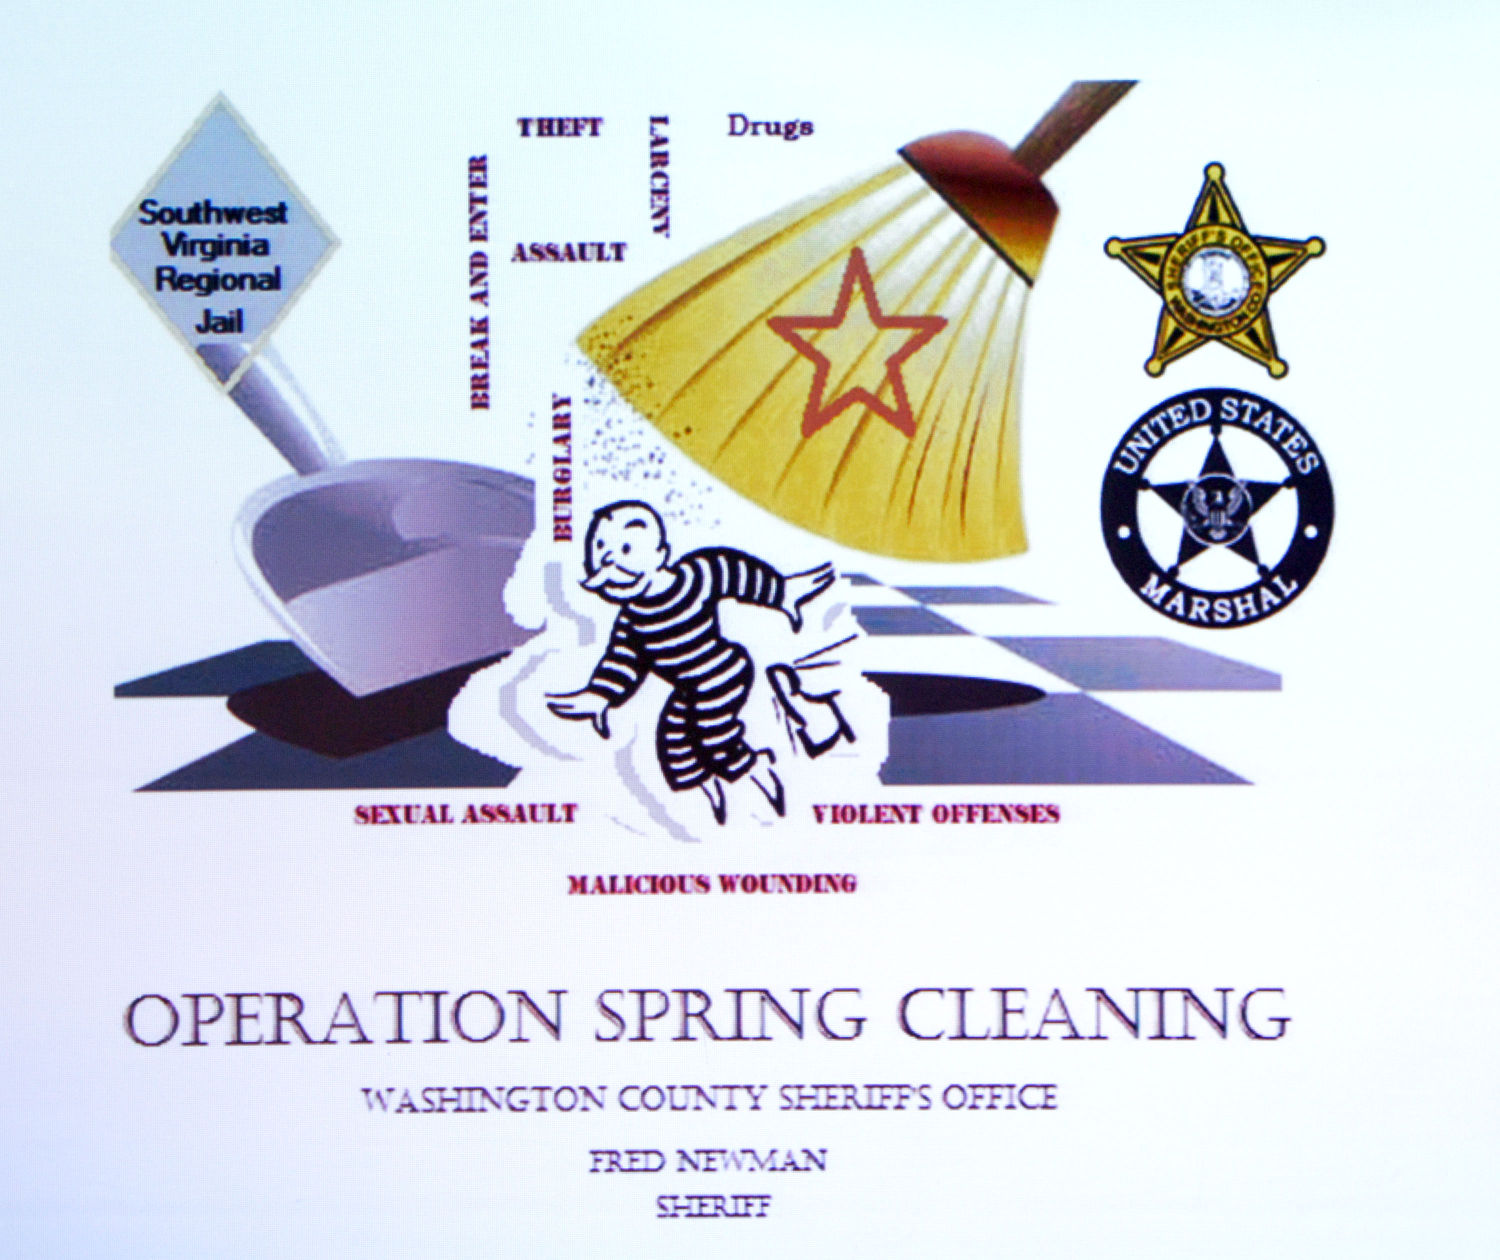 operation spring cleaning counterfeits